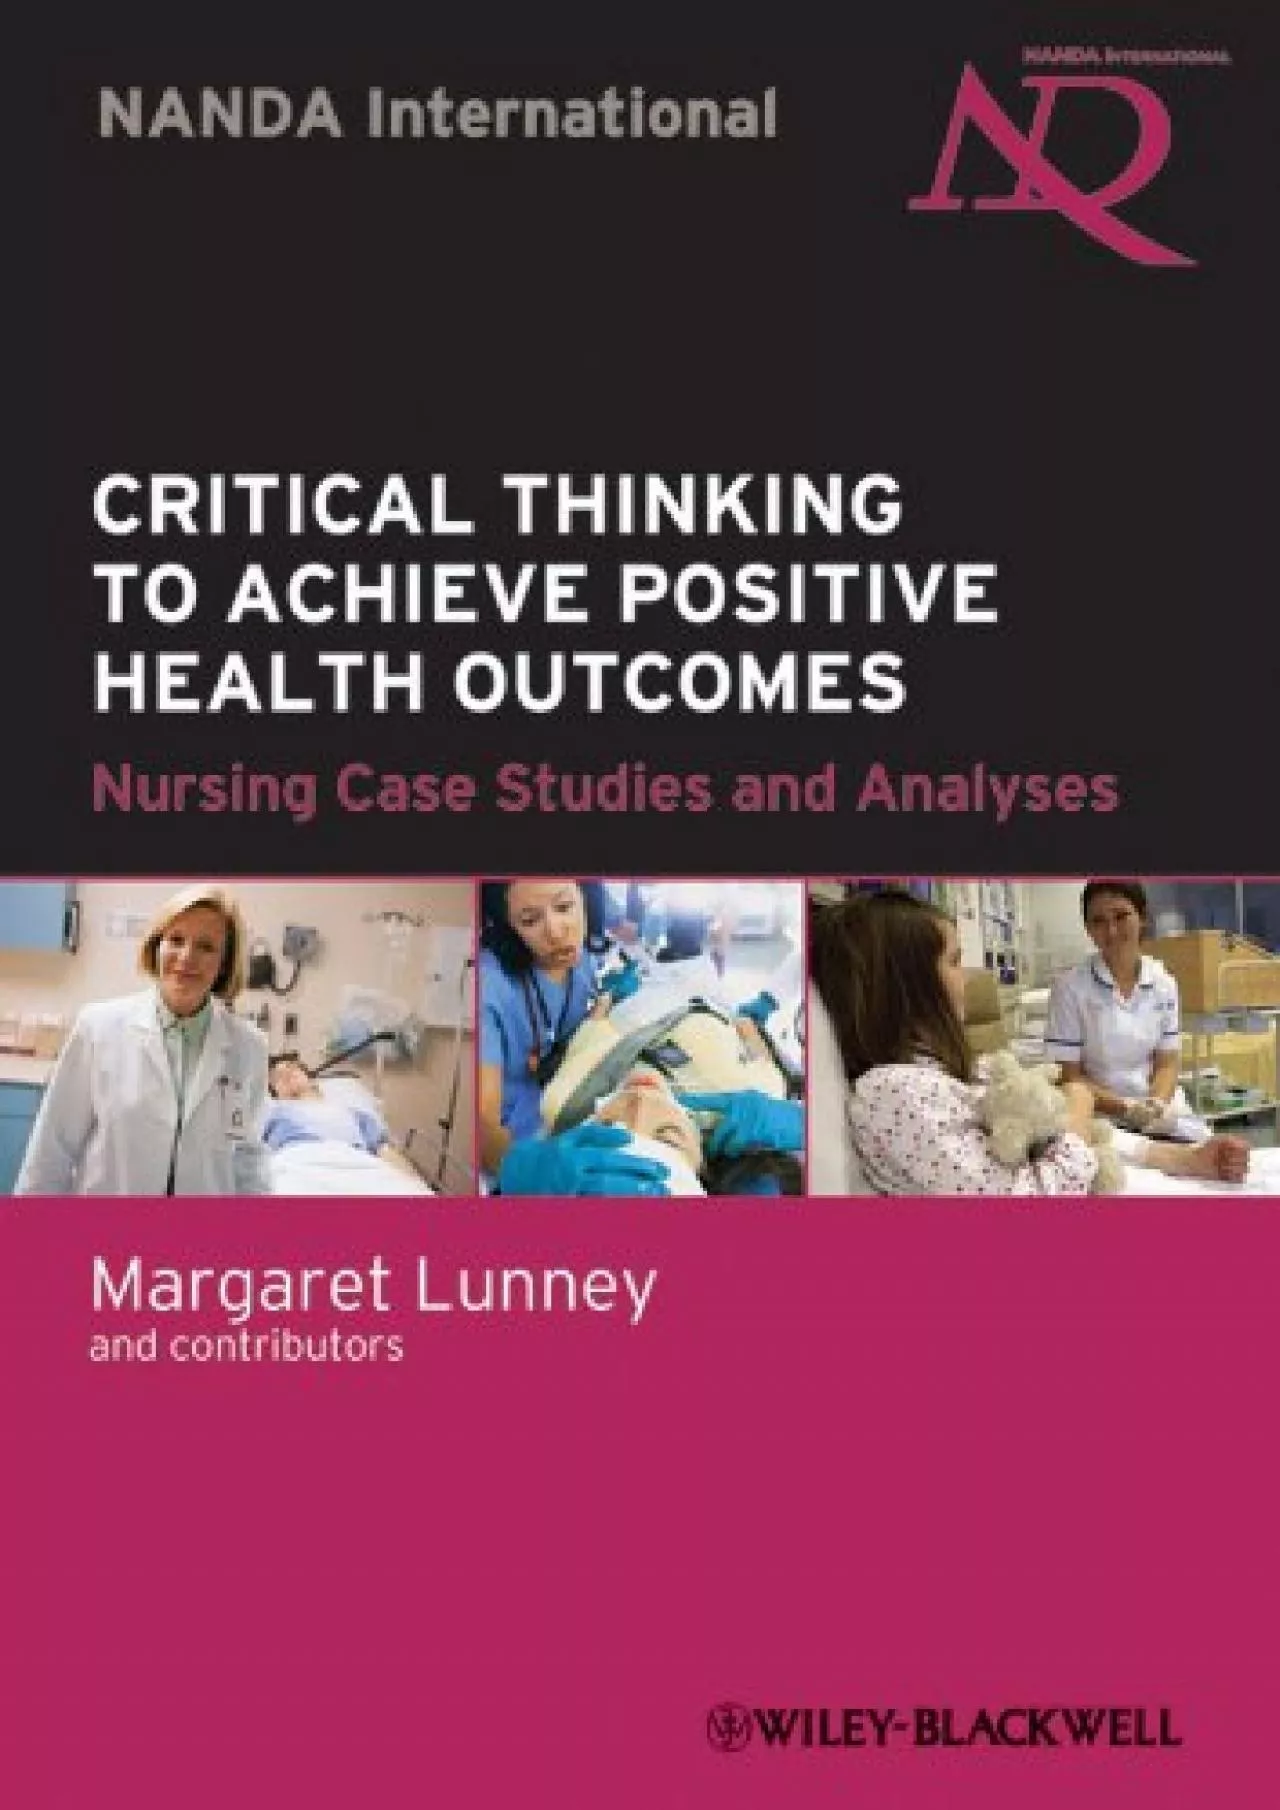 (BOOK)-Critical Thinking to Achieve Positive Health Outcomes: Nursing Case Studies and